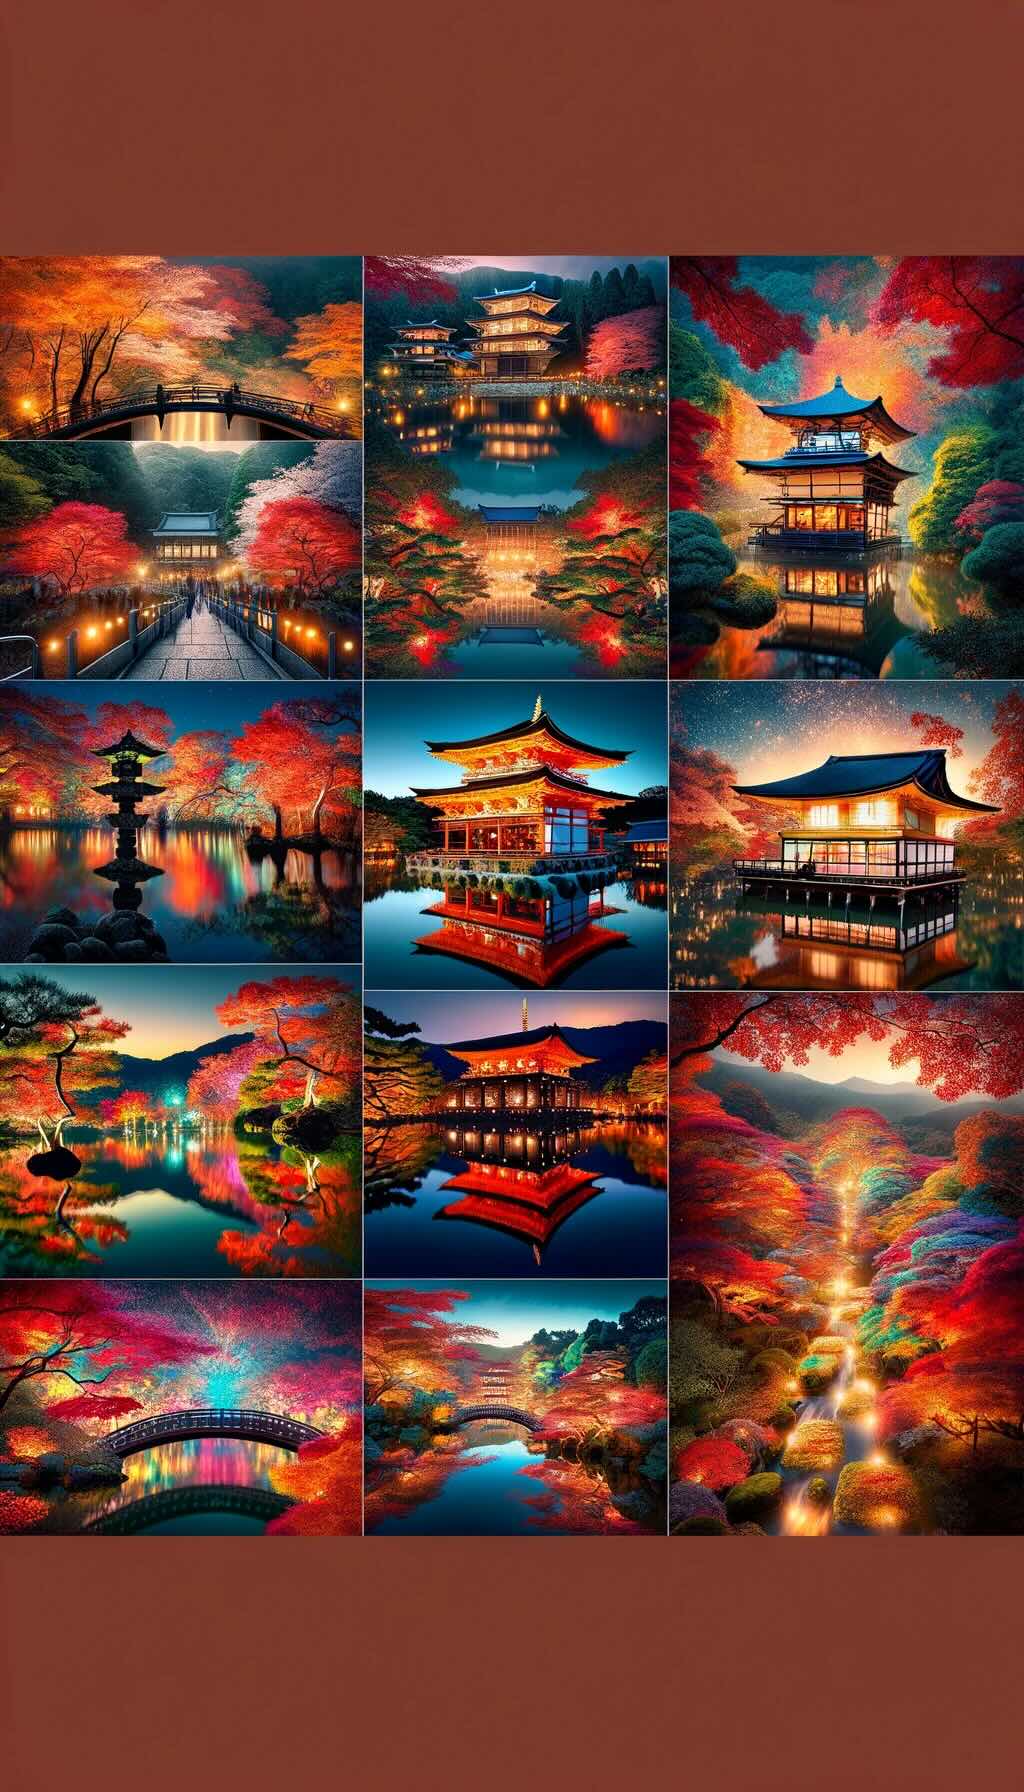 autumn foliage illumination events at various locations in Japan, capturing the magical atmosphere of these celebrations - digital art 